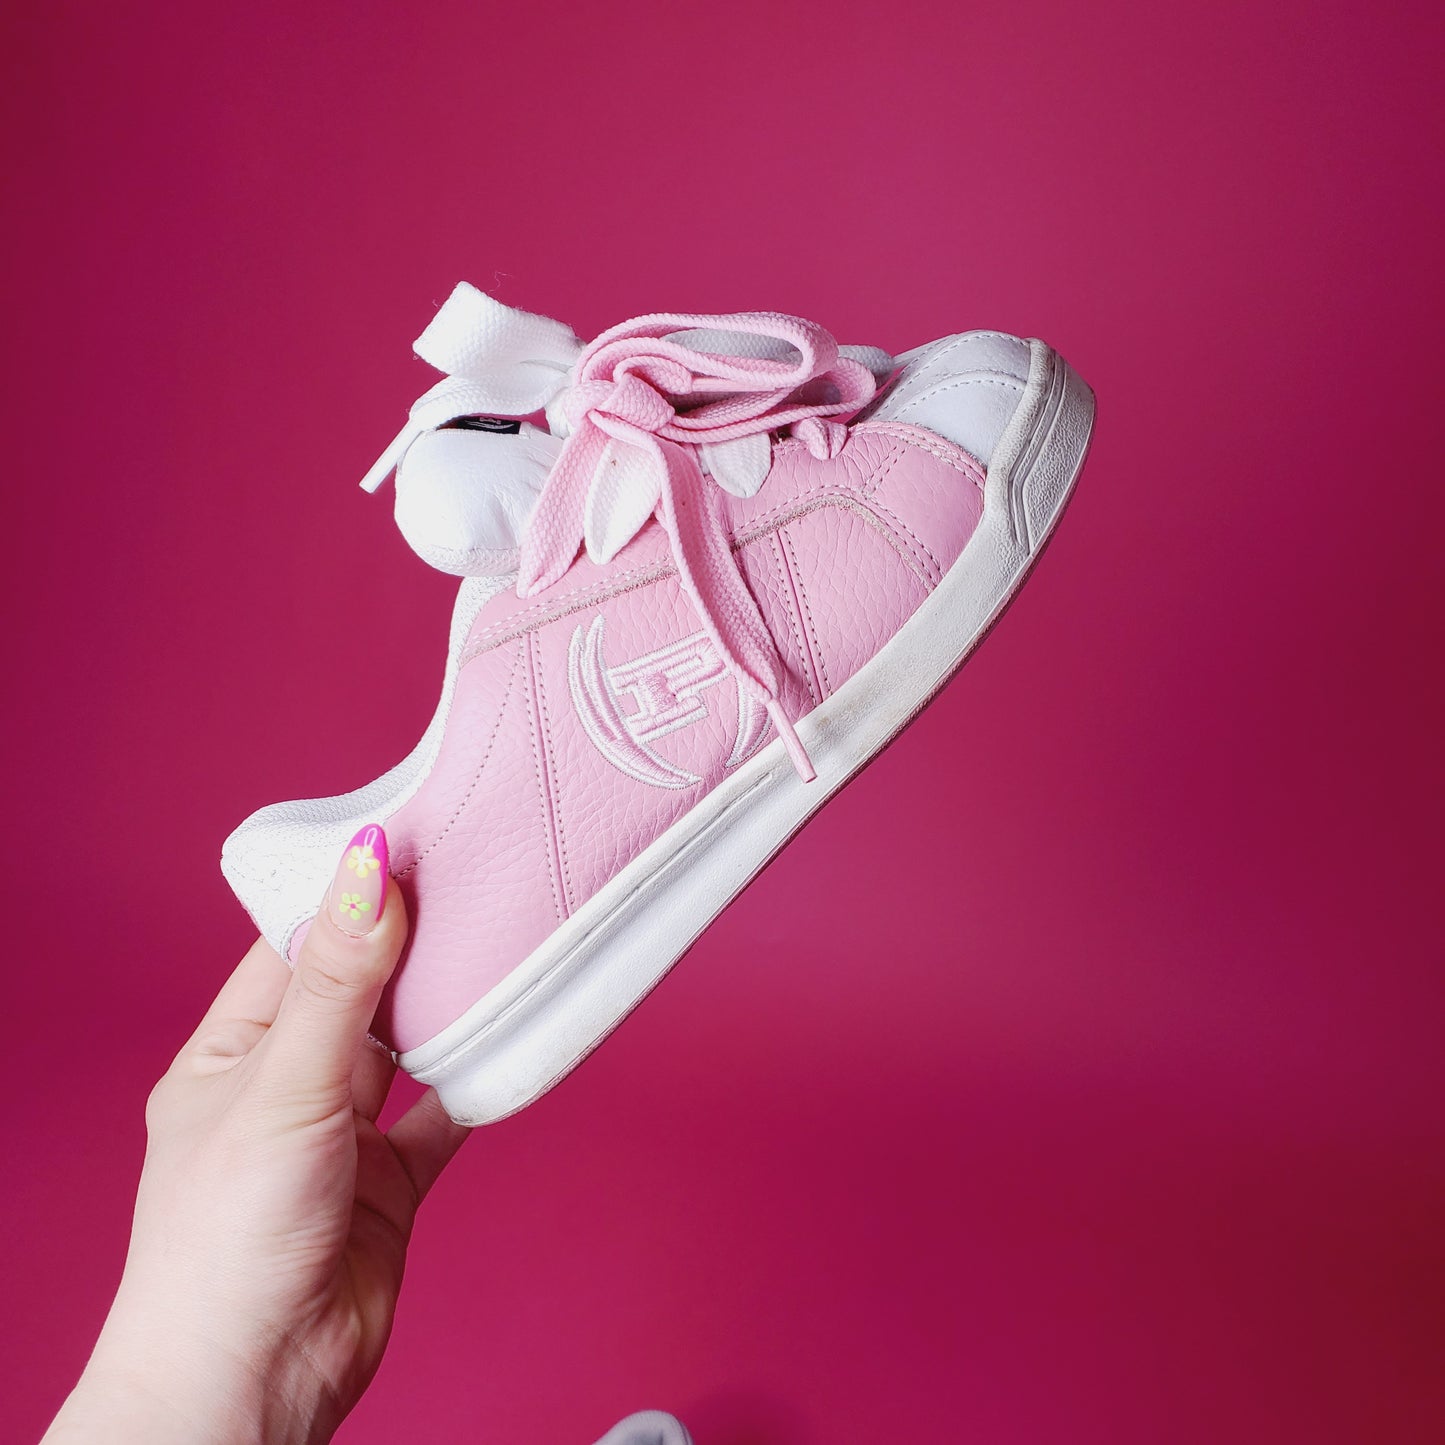 Baby pink & white phat farm lowtop sneakers